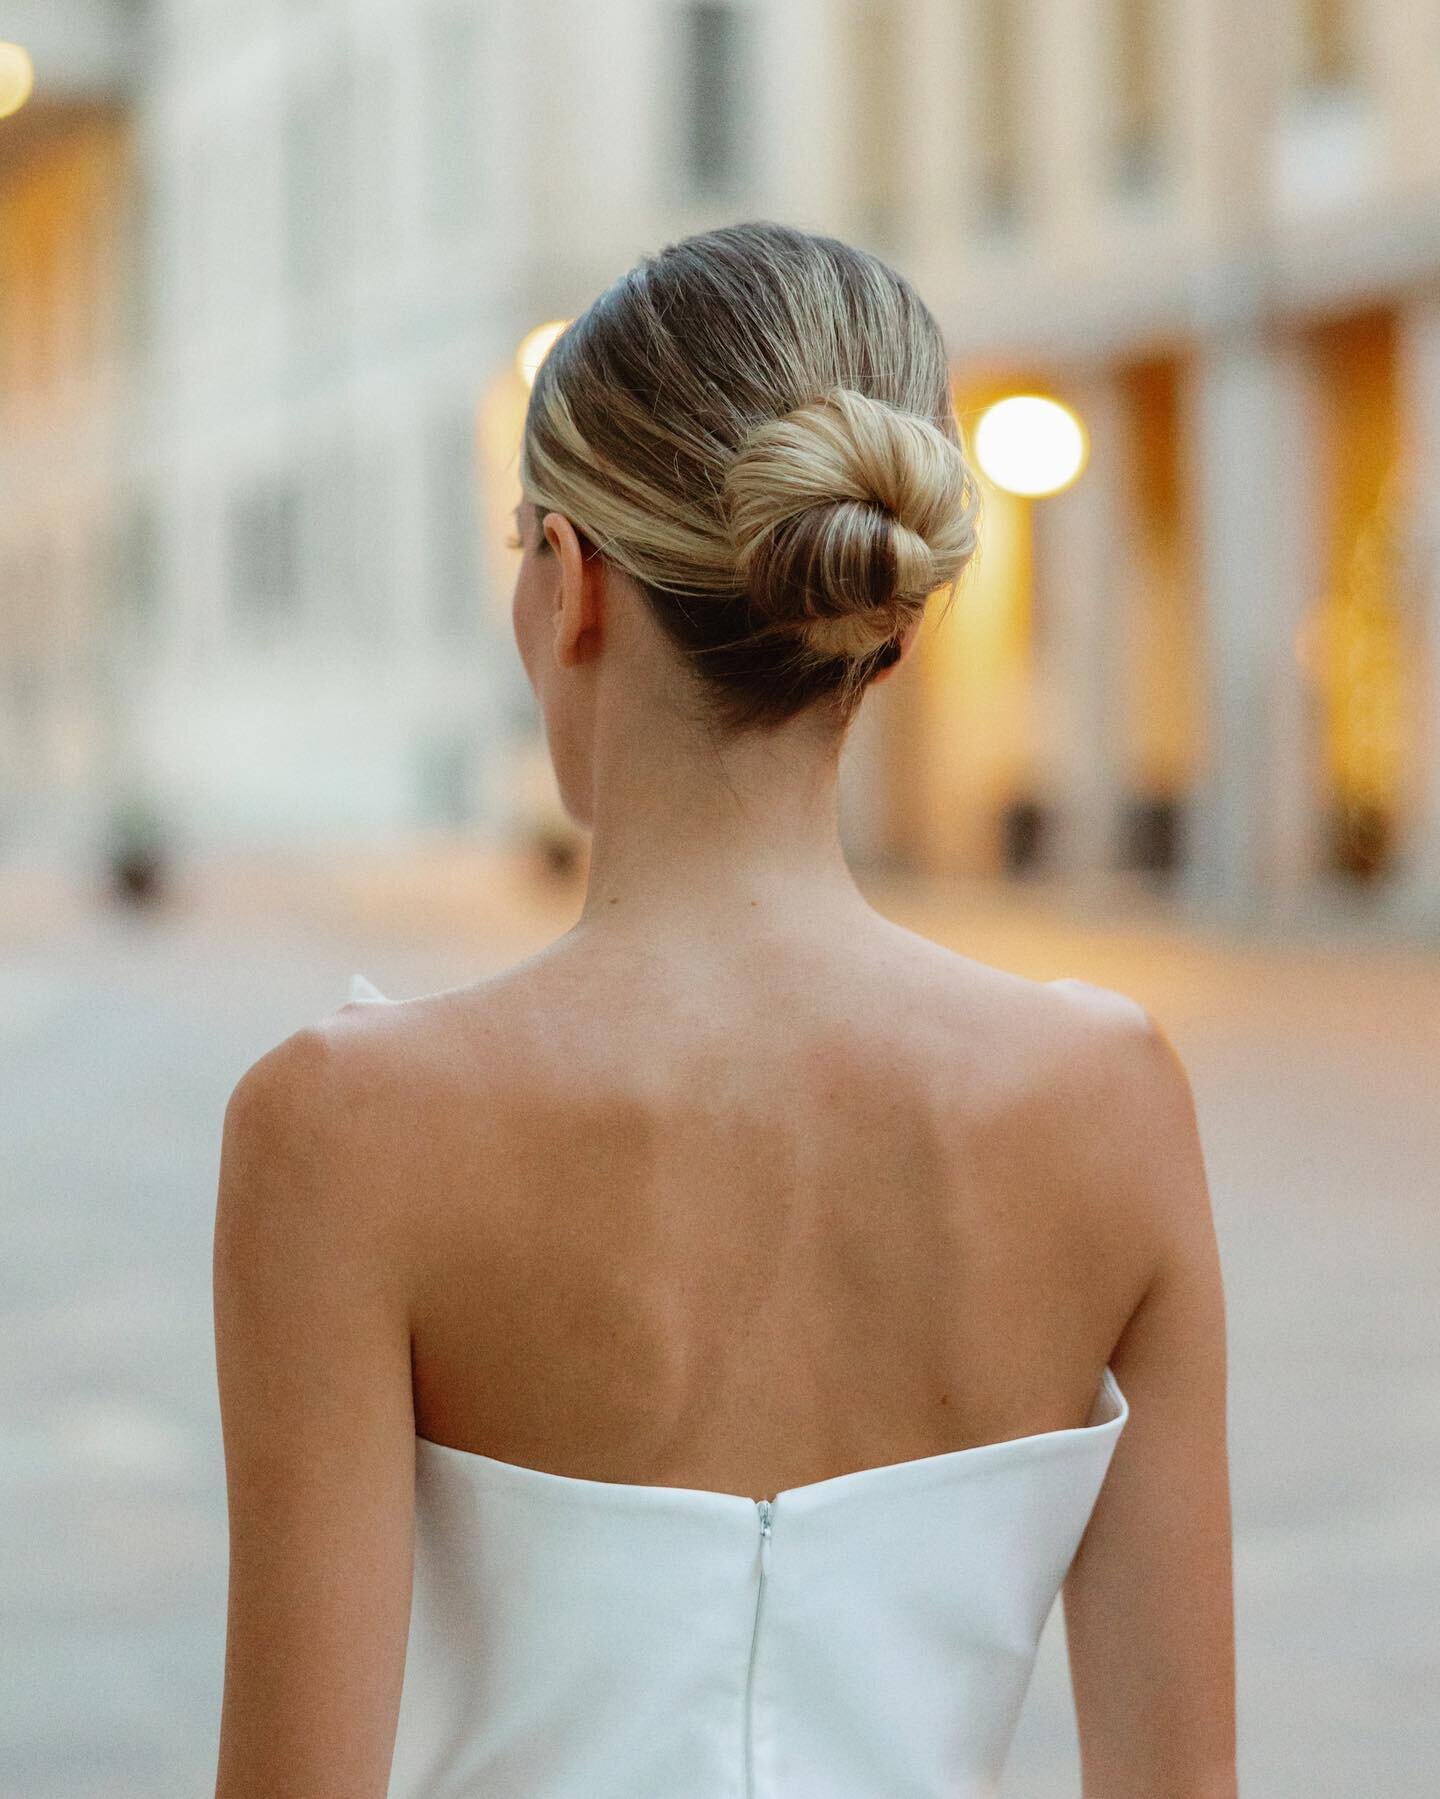 Wish you could wear a sleek bun without it feeling basic?! Clean-girl sleek buns are here to stay and we LOVE 🙌🏼💖 But how do you elevate this style from &lsquo;every day&rsquo; sleek office bun to Sophia Richie level wedding bun?? Theres a few fac